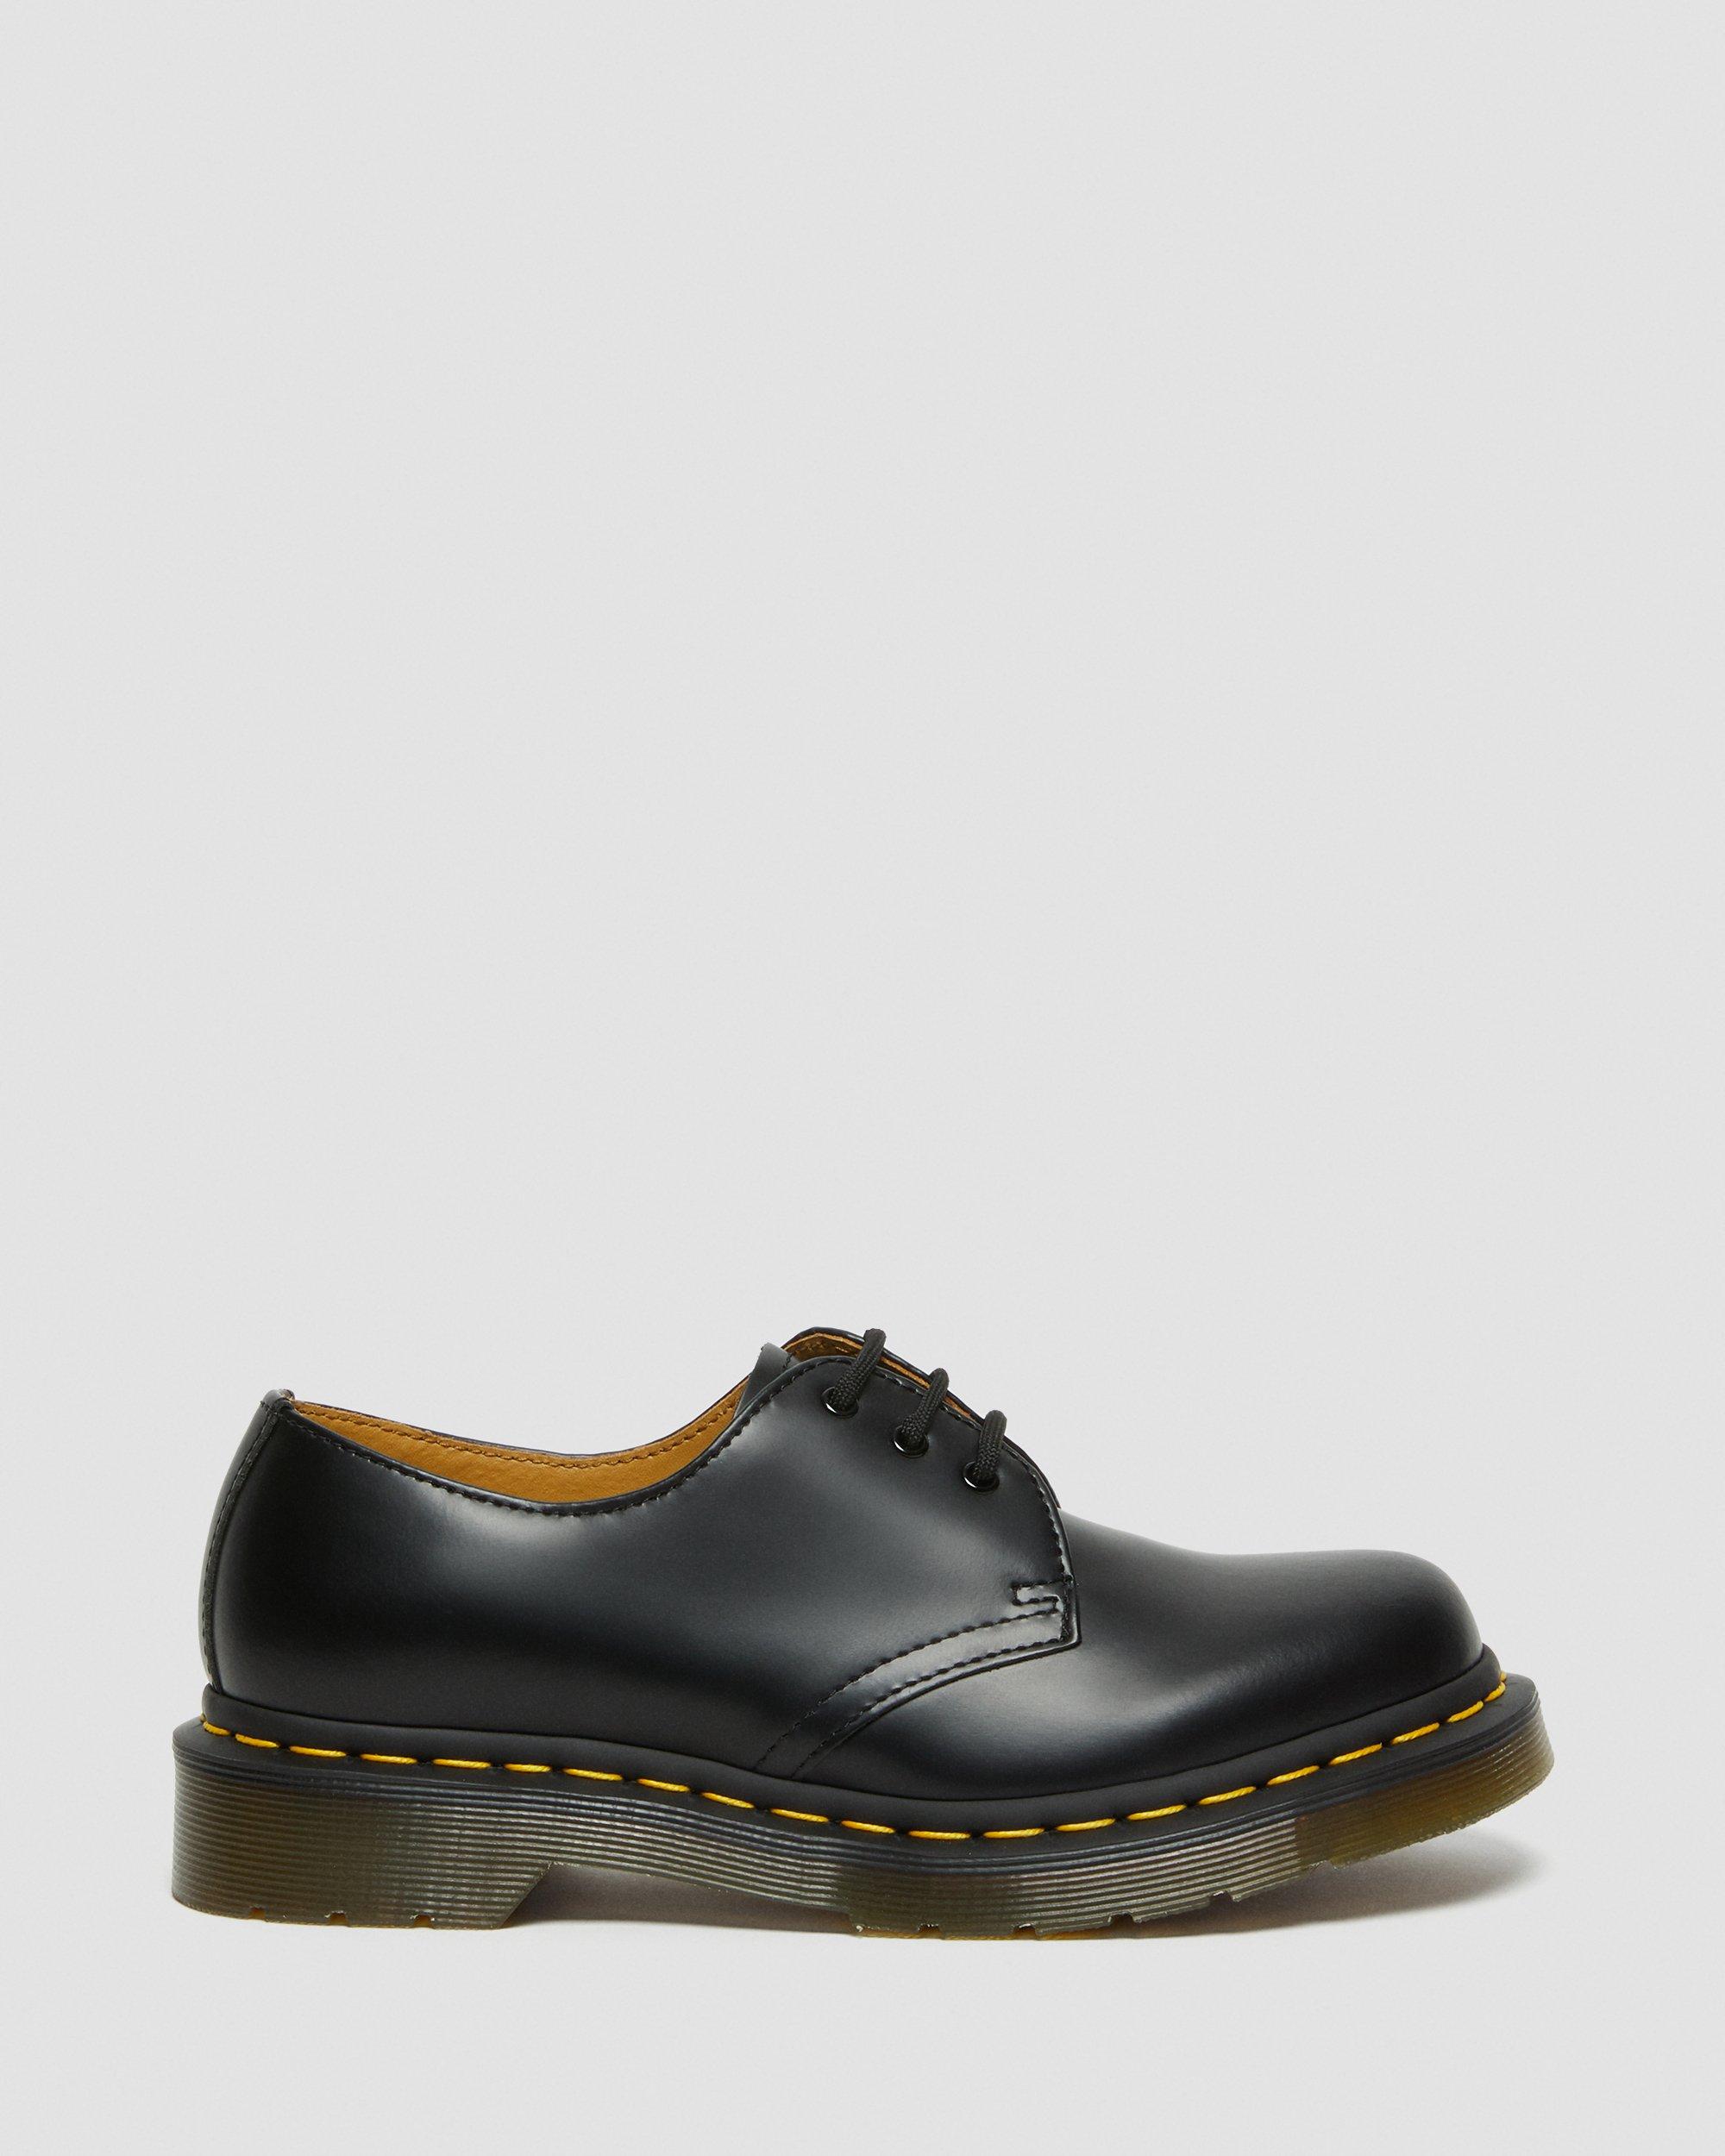 DR MARTENS 1461 Women's Smooth Leather Oxford Shoes